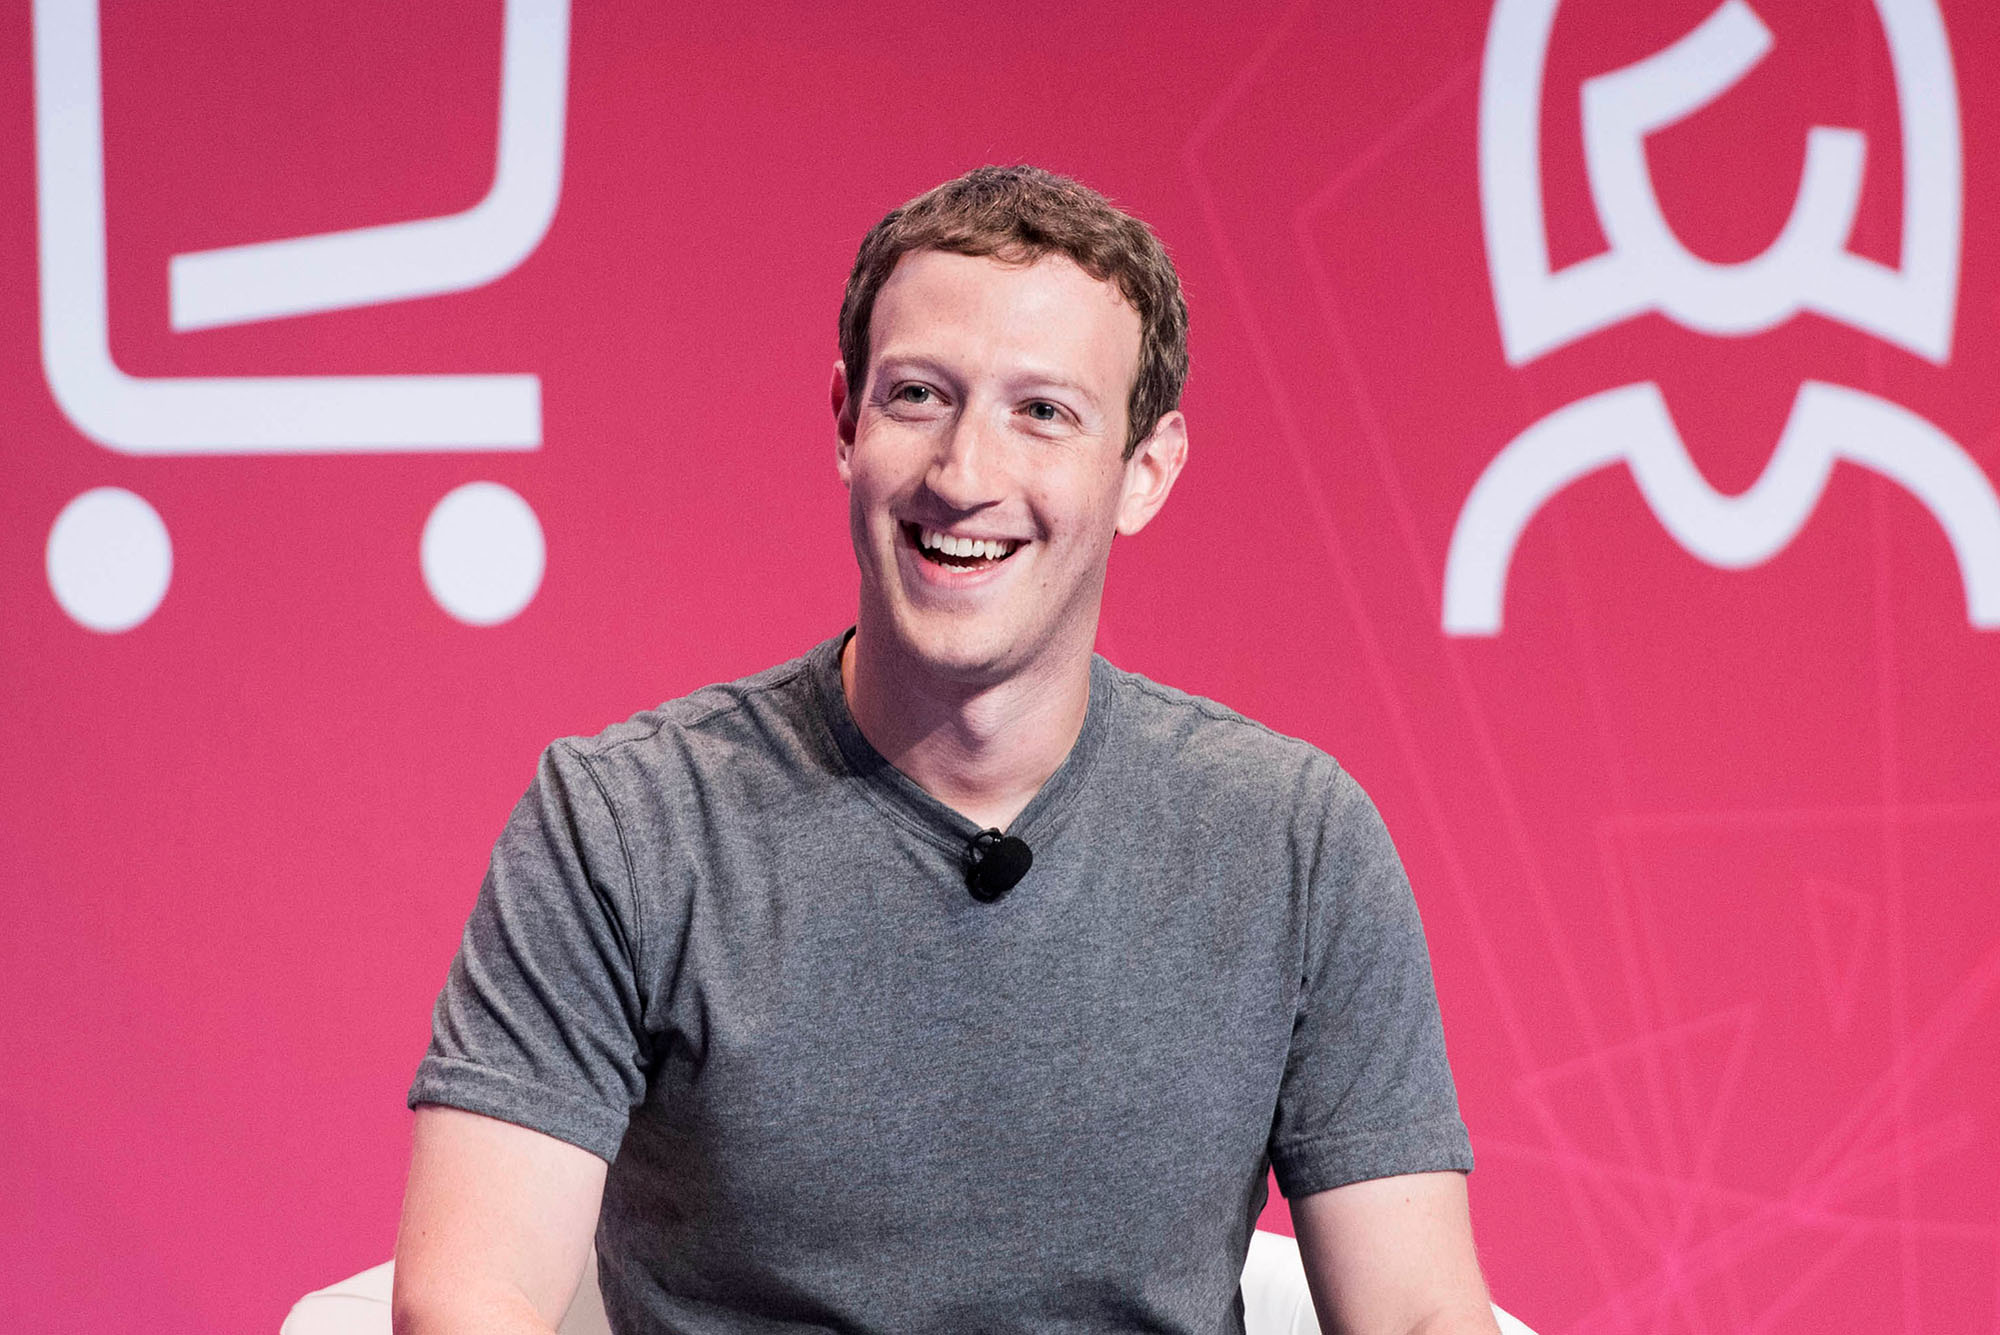 photo of CEO Mark Zuckerberg announcing that Facebook is changing its corporate name to Meta. Smiling and wearing a grey shirt, he looks to the left and laughs. He sits in front of a rose-colored background with white icons of a shopping cart and female person behind him.